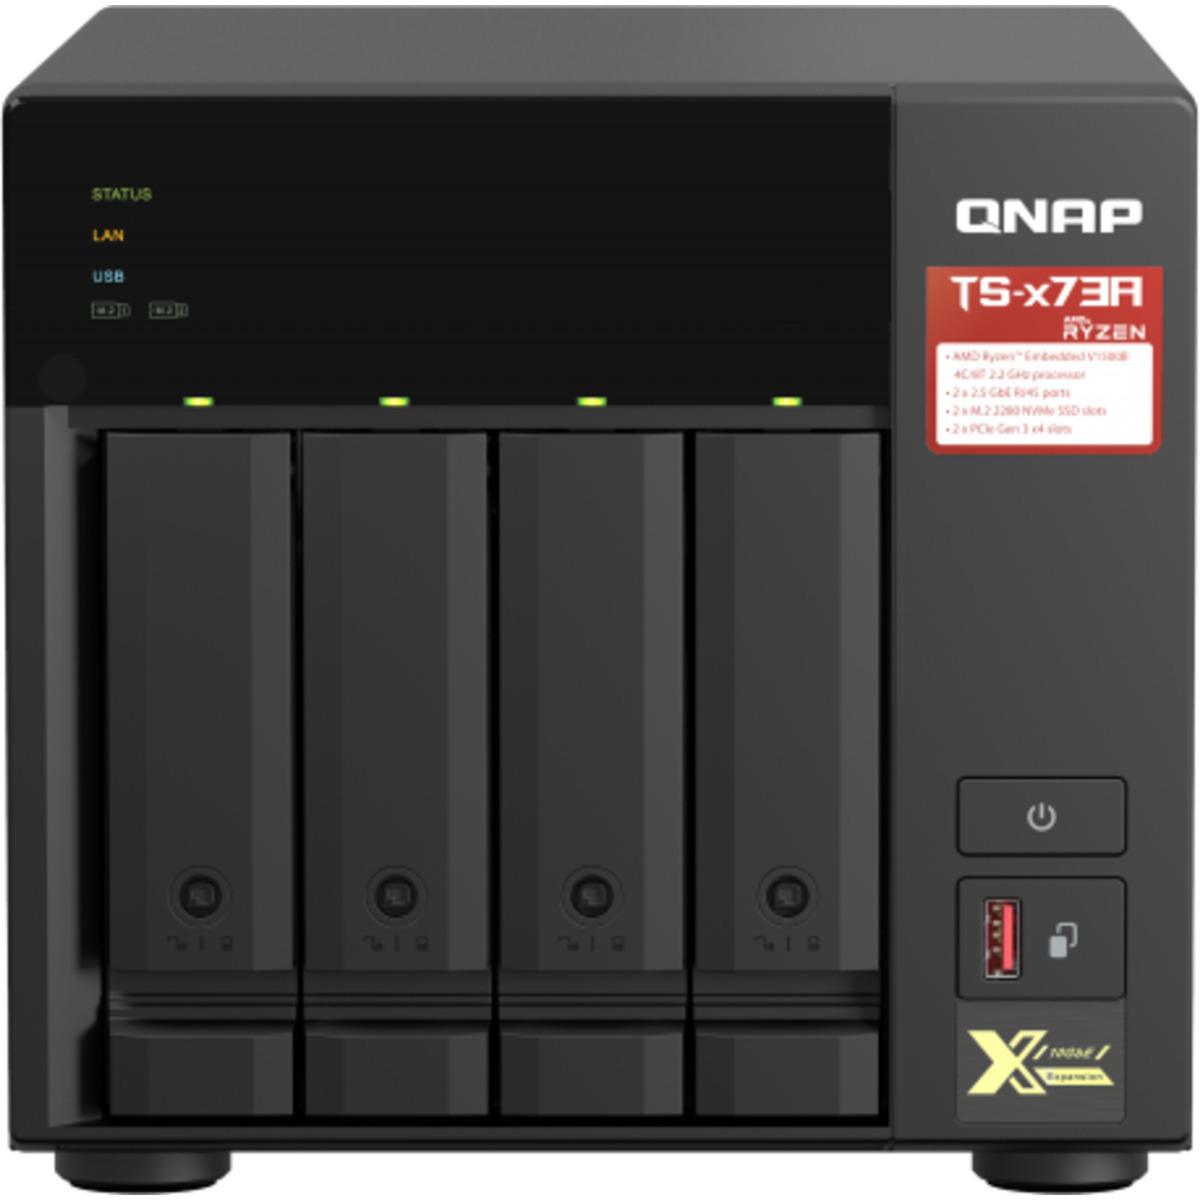 QNAP TS-473A 8tb 4-Bay Desktop Multimedia / Power User / Business NAS - Network Attached Storage Device 2x4tb Seagate BarraCuda ST4000DM004 3.5 7200rpm SATA 6Gb/s HDD CONSUMER Class Drives Installed - Burn-In Tested TS-473A